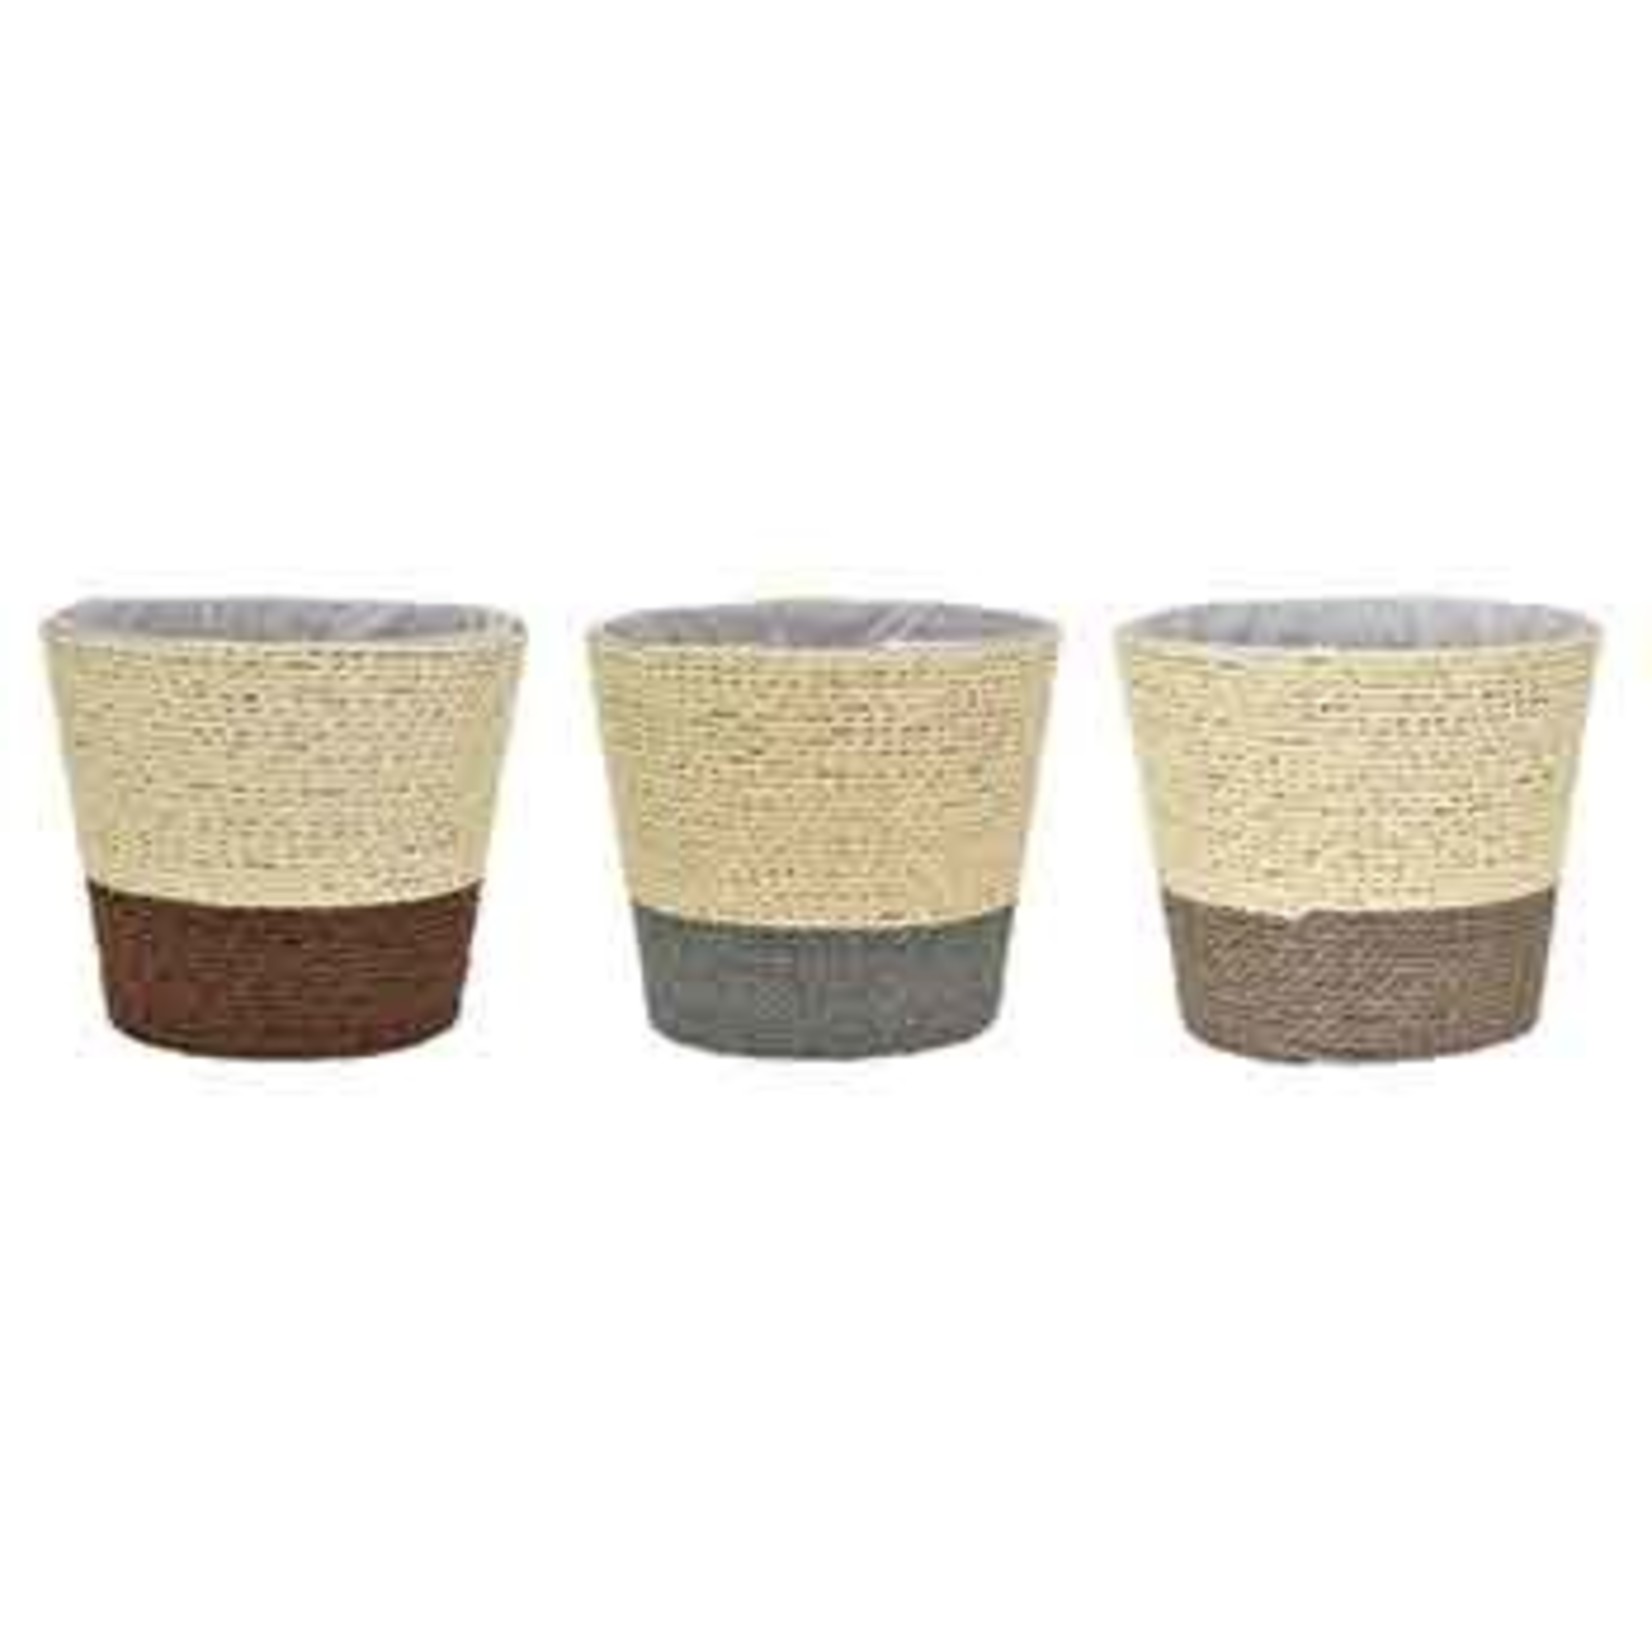 6.25"H X 5.75” SEA GRASS POT BASKETS WITH LINER (PRICE PER EACH, BOX HAS ASSORTMENT)